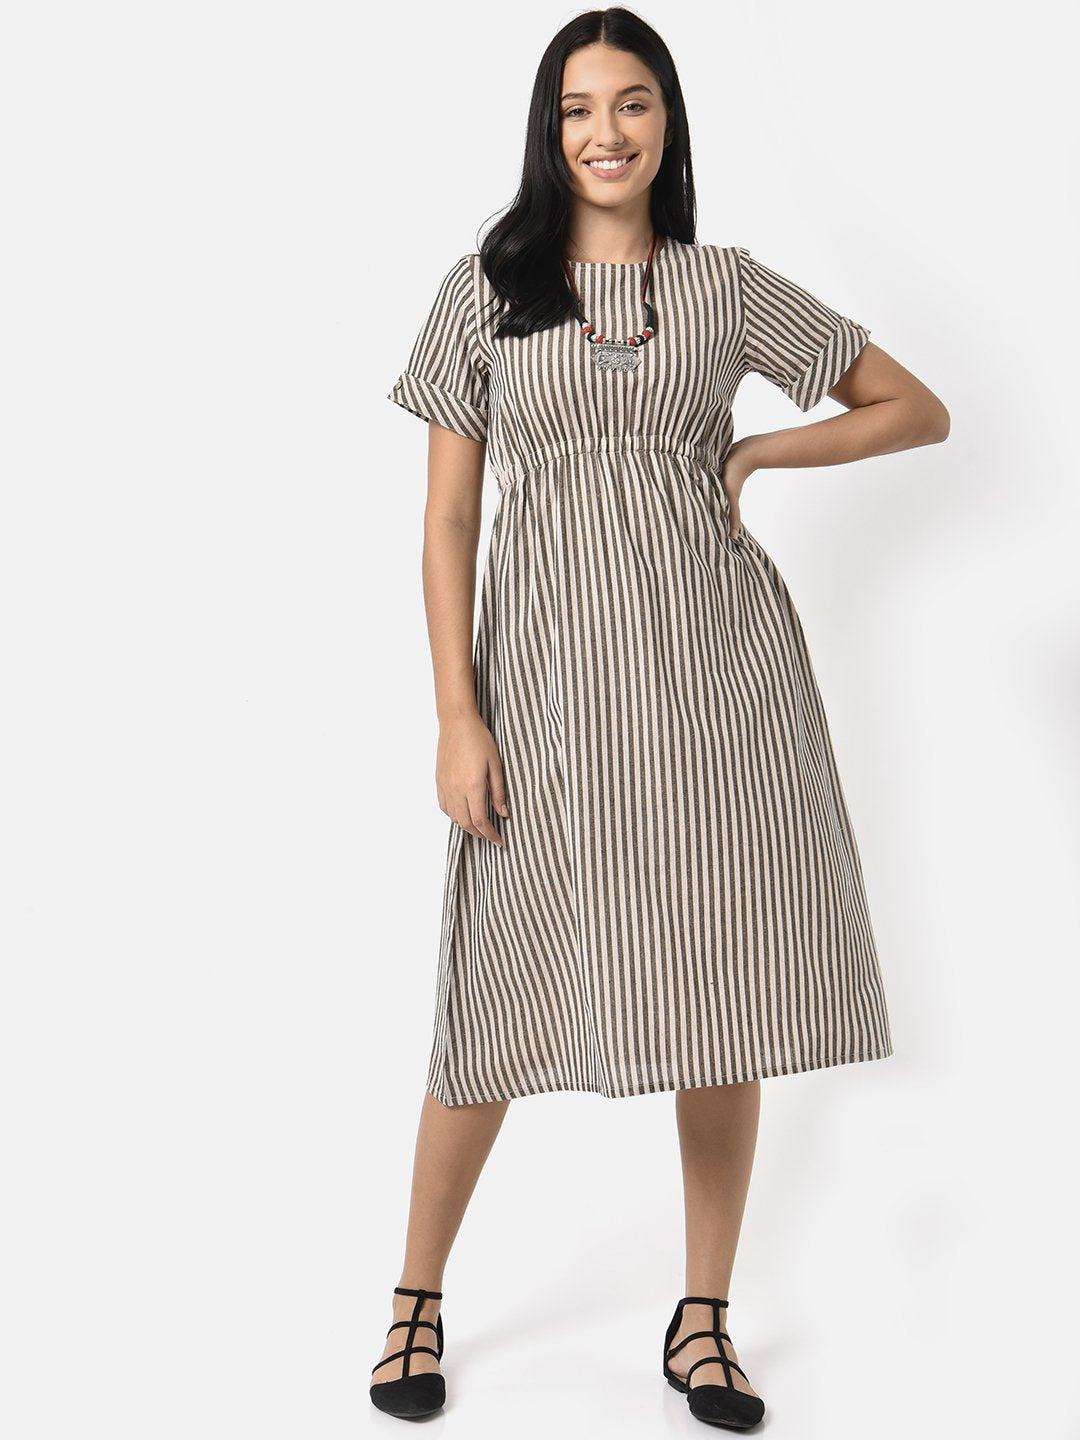 Brown_Striped_Dress_Front_Full_Shot_1 (7047174193321)